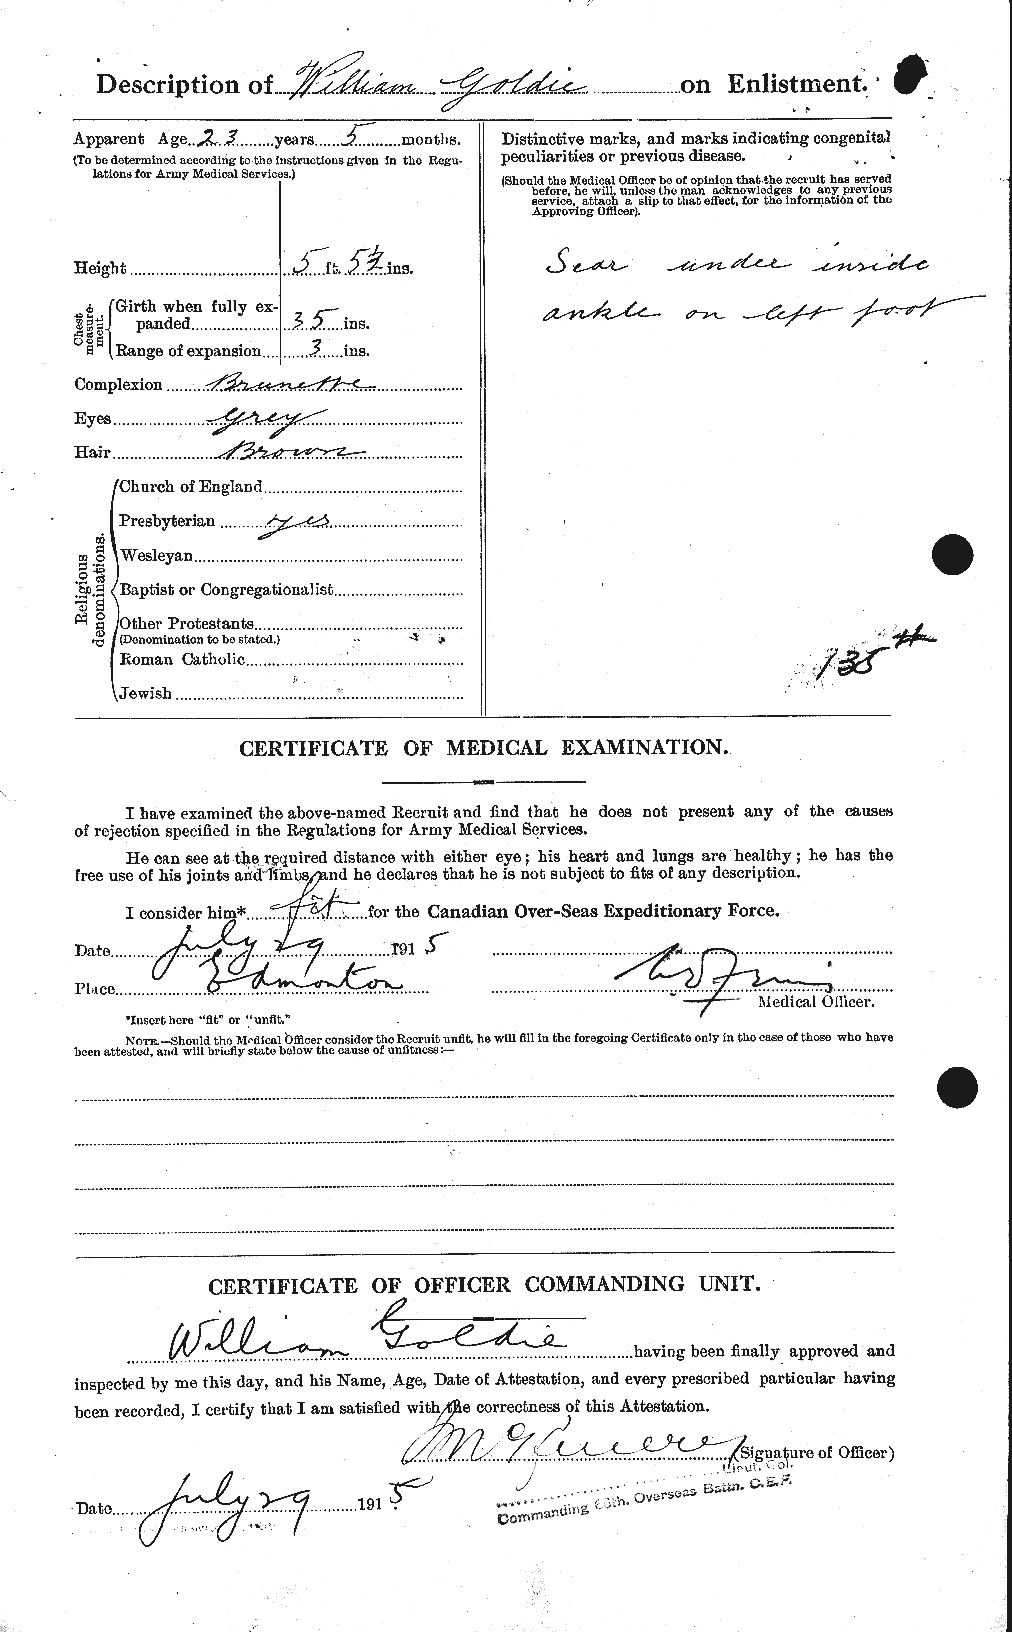 Personnel Records of the First World War - CEF 353952b